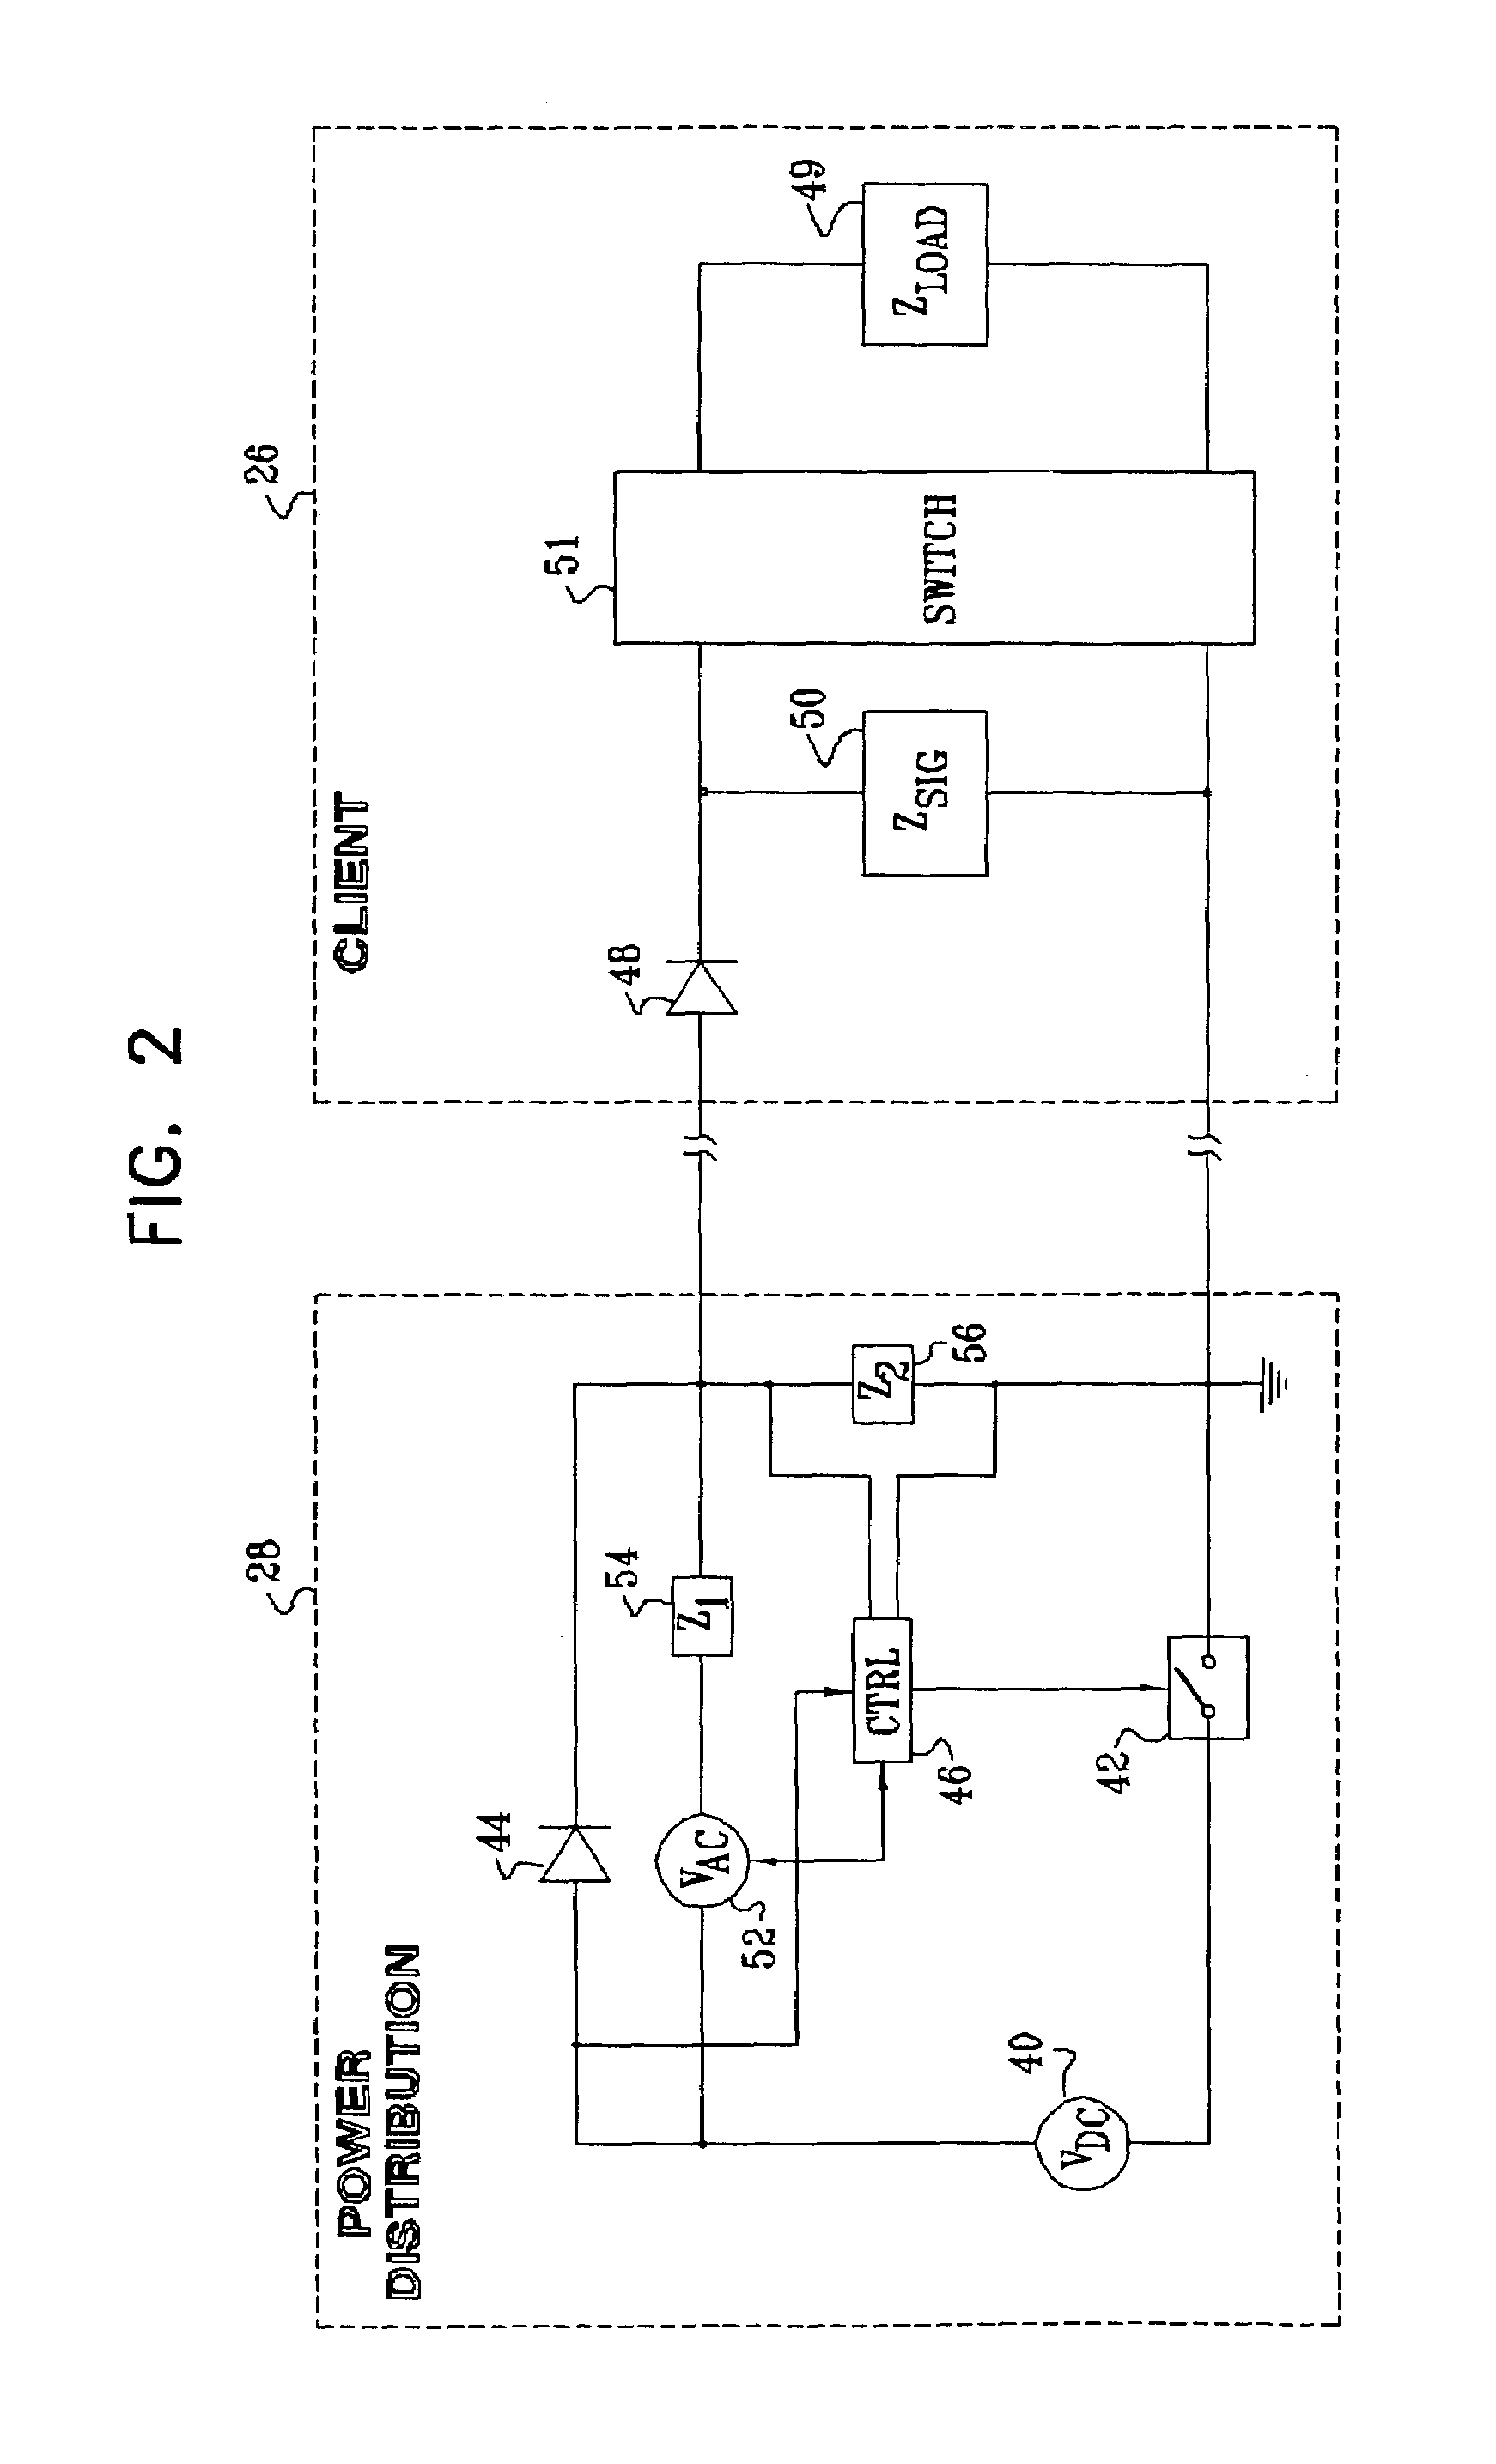 Detecting network power connection status using AC signals